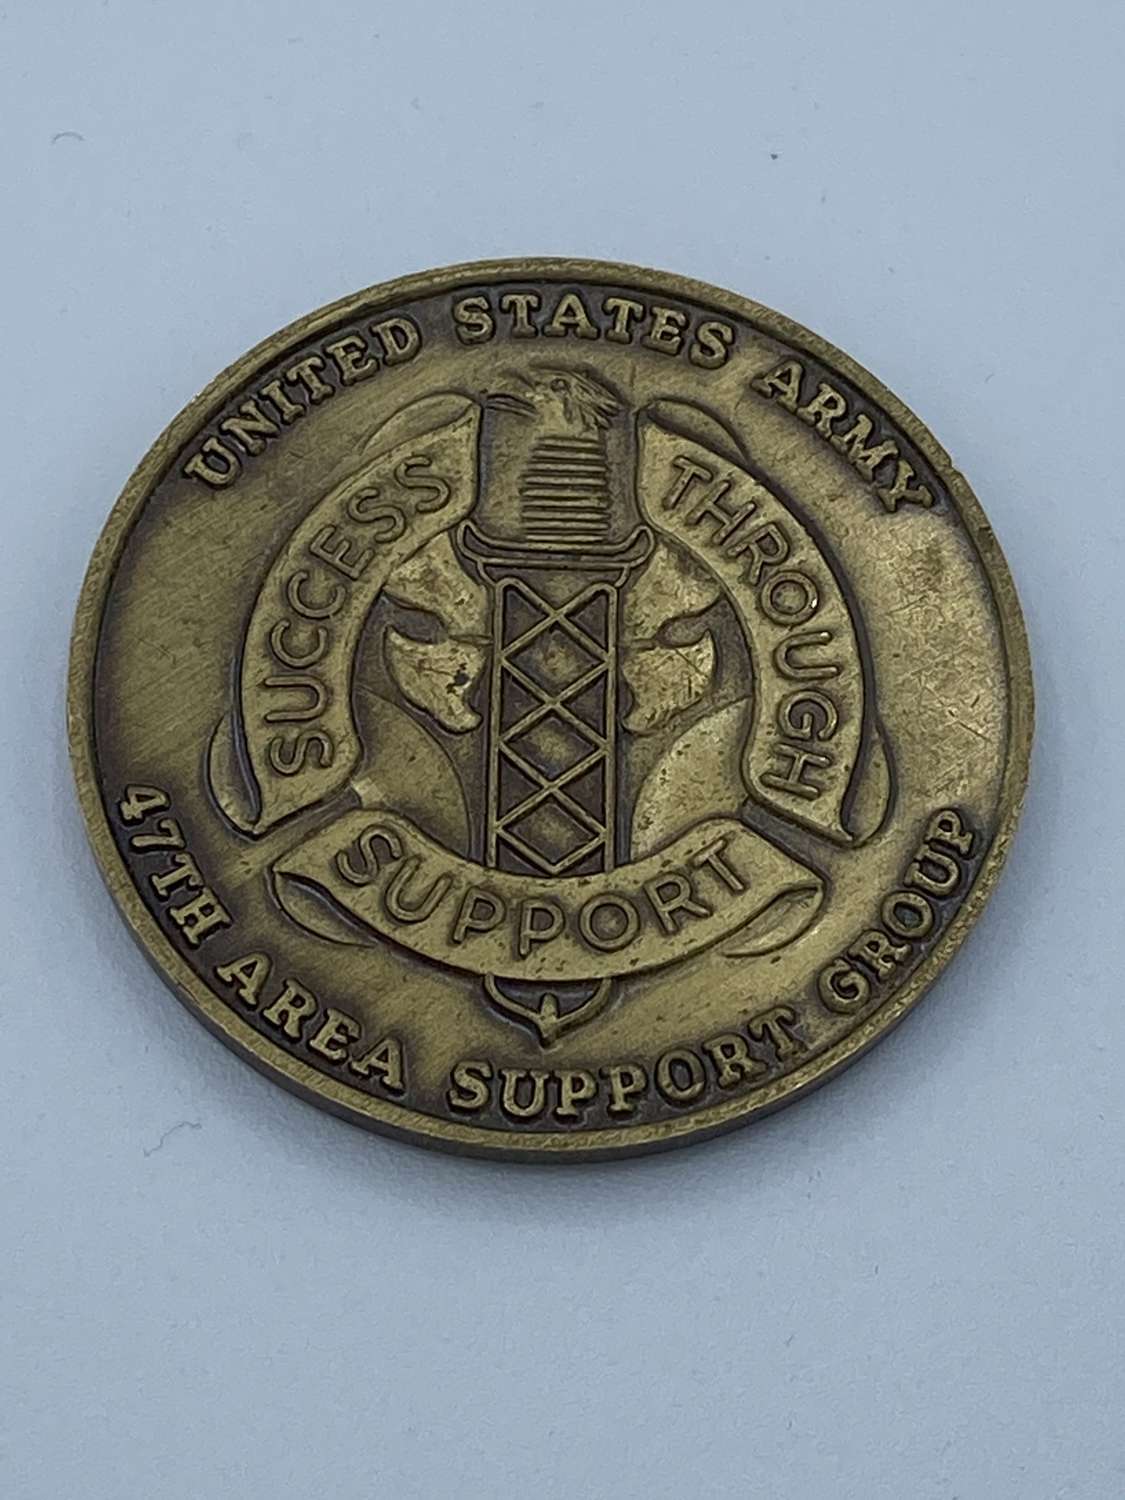 US Army Military Community Uk Support Group Medal Coin